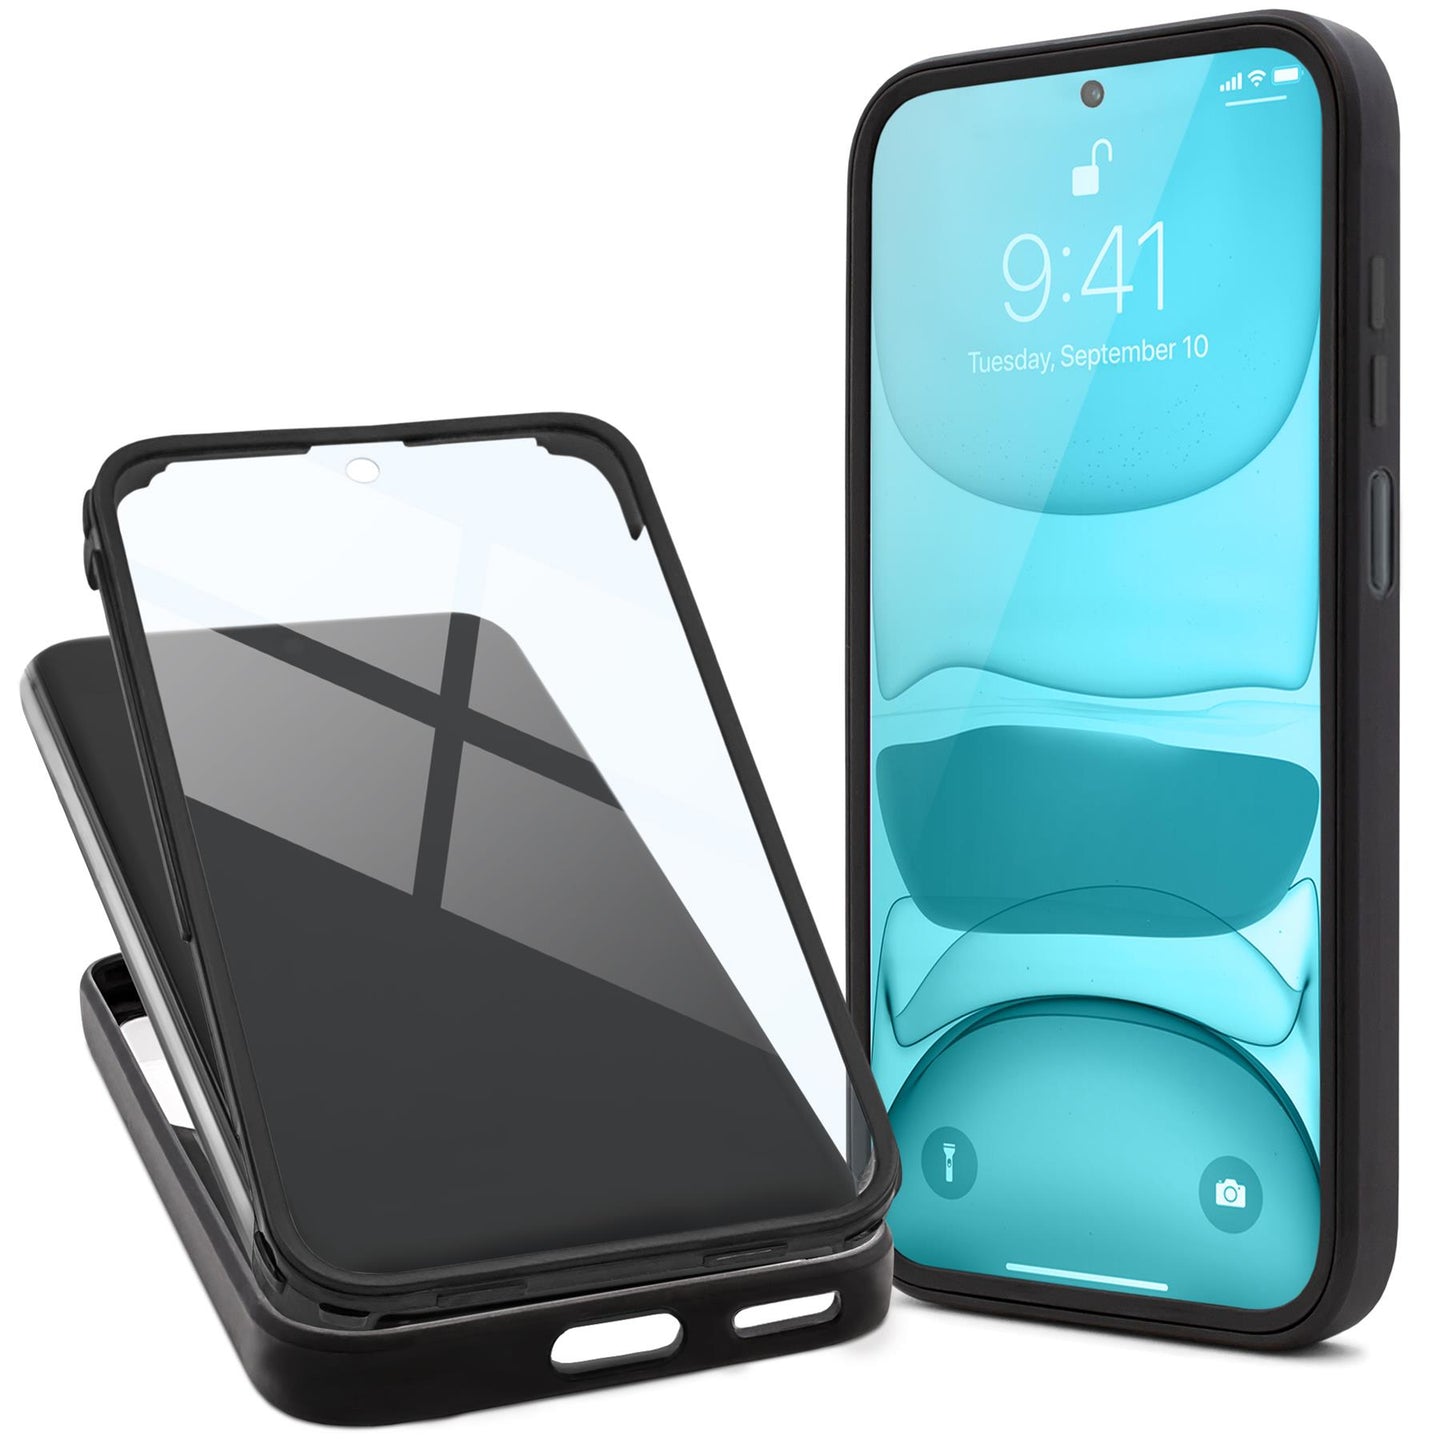 Moozy 360 Case for Xiaomi Redmi Note 11 Pro 5G/4G - Black Rim Transparent Case, Full Body Double-sided Protection, Cover with Built-in Screen Protector